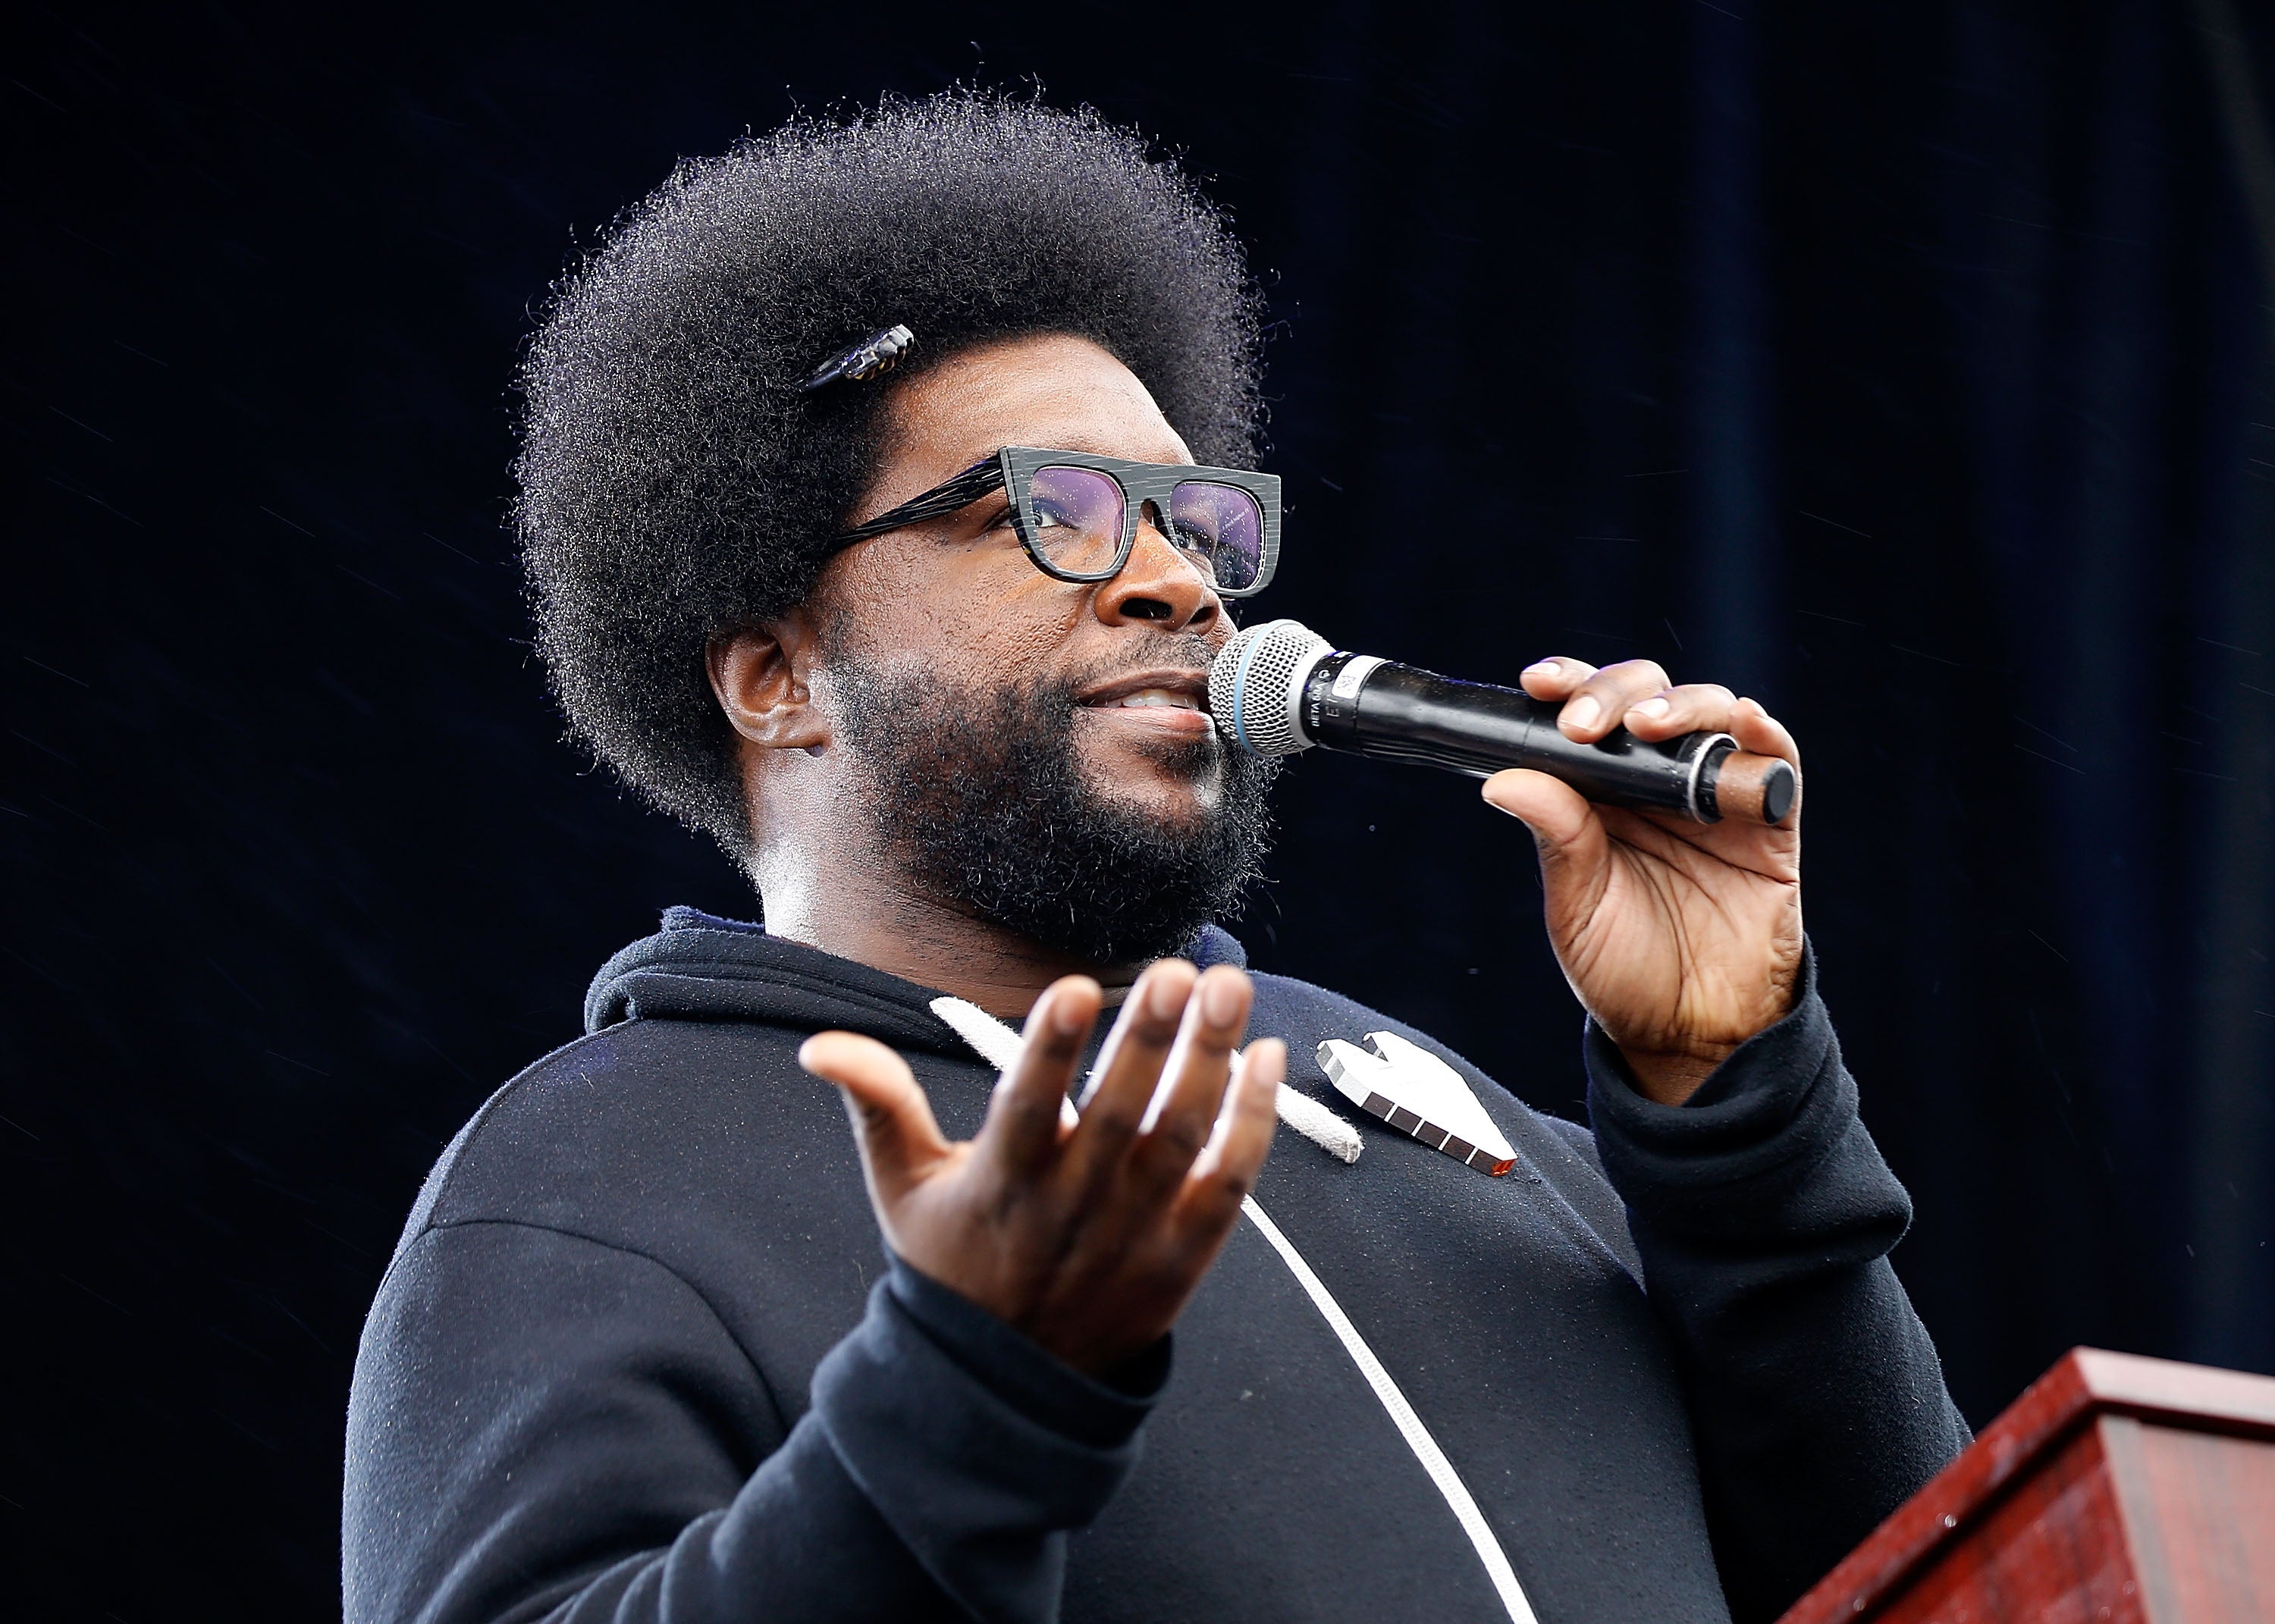 Questlove Dismisses ‘Alternative Facts’ At March For Science: ‘We Need To Work For Science’